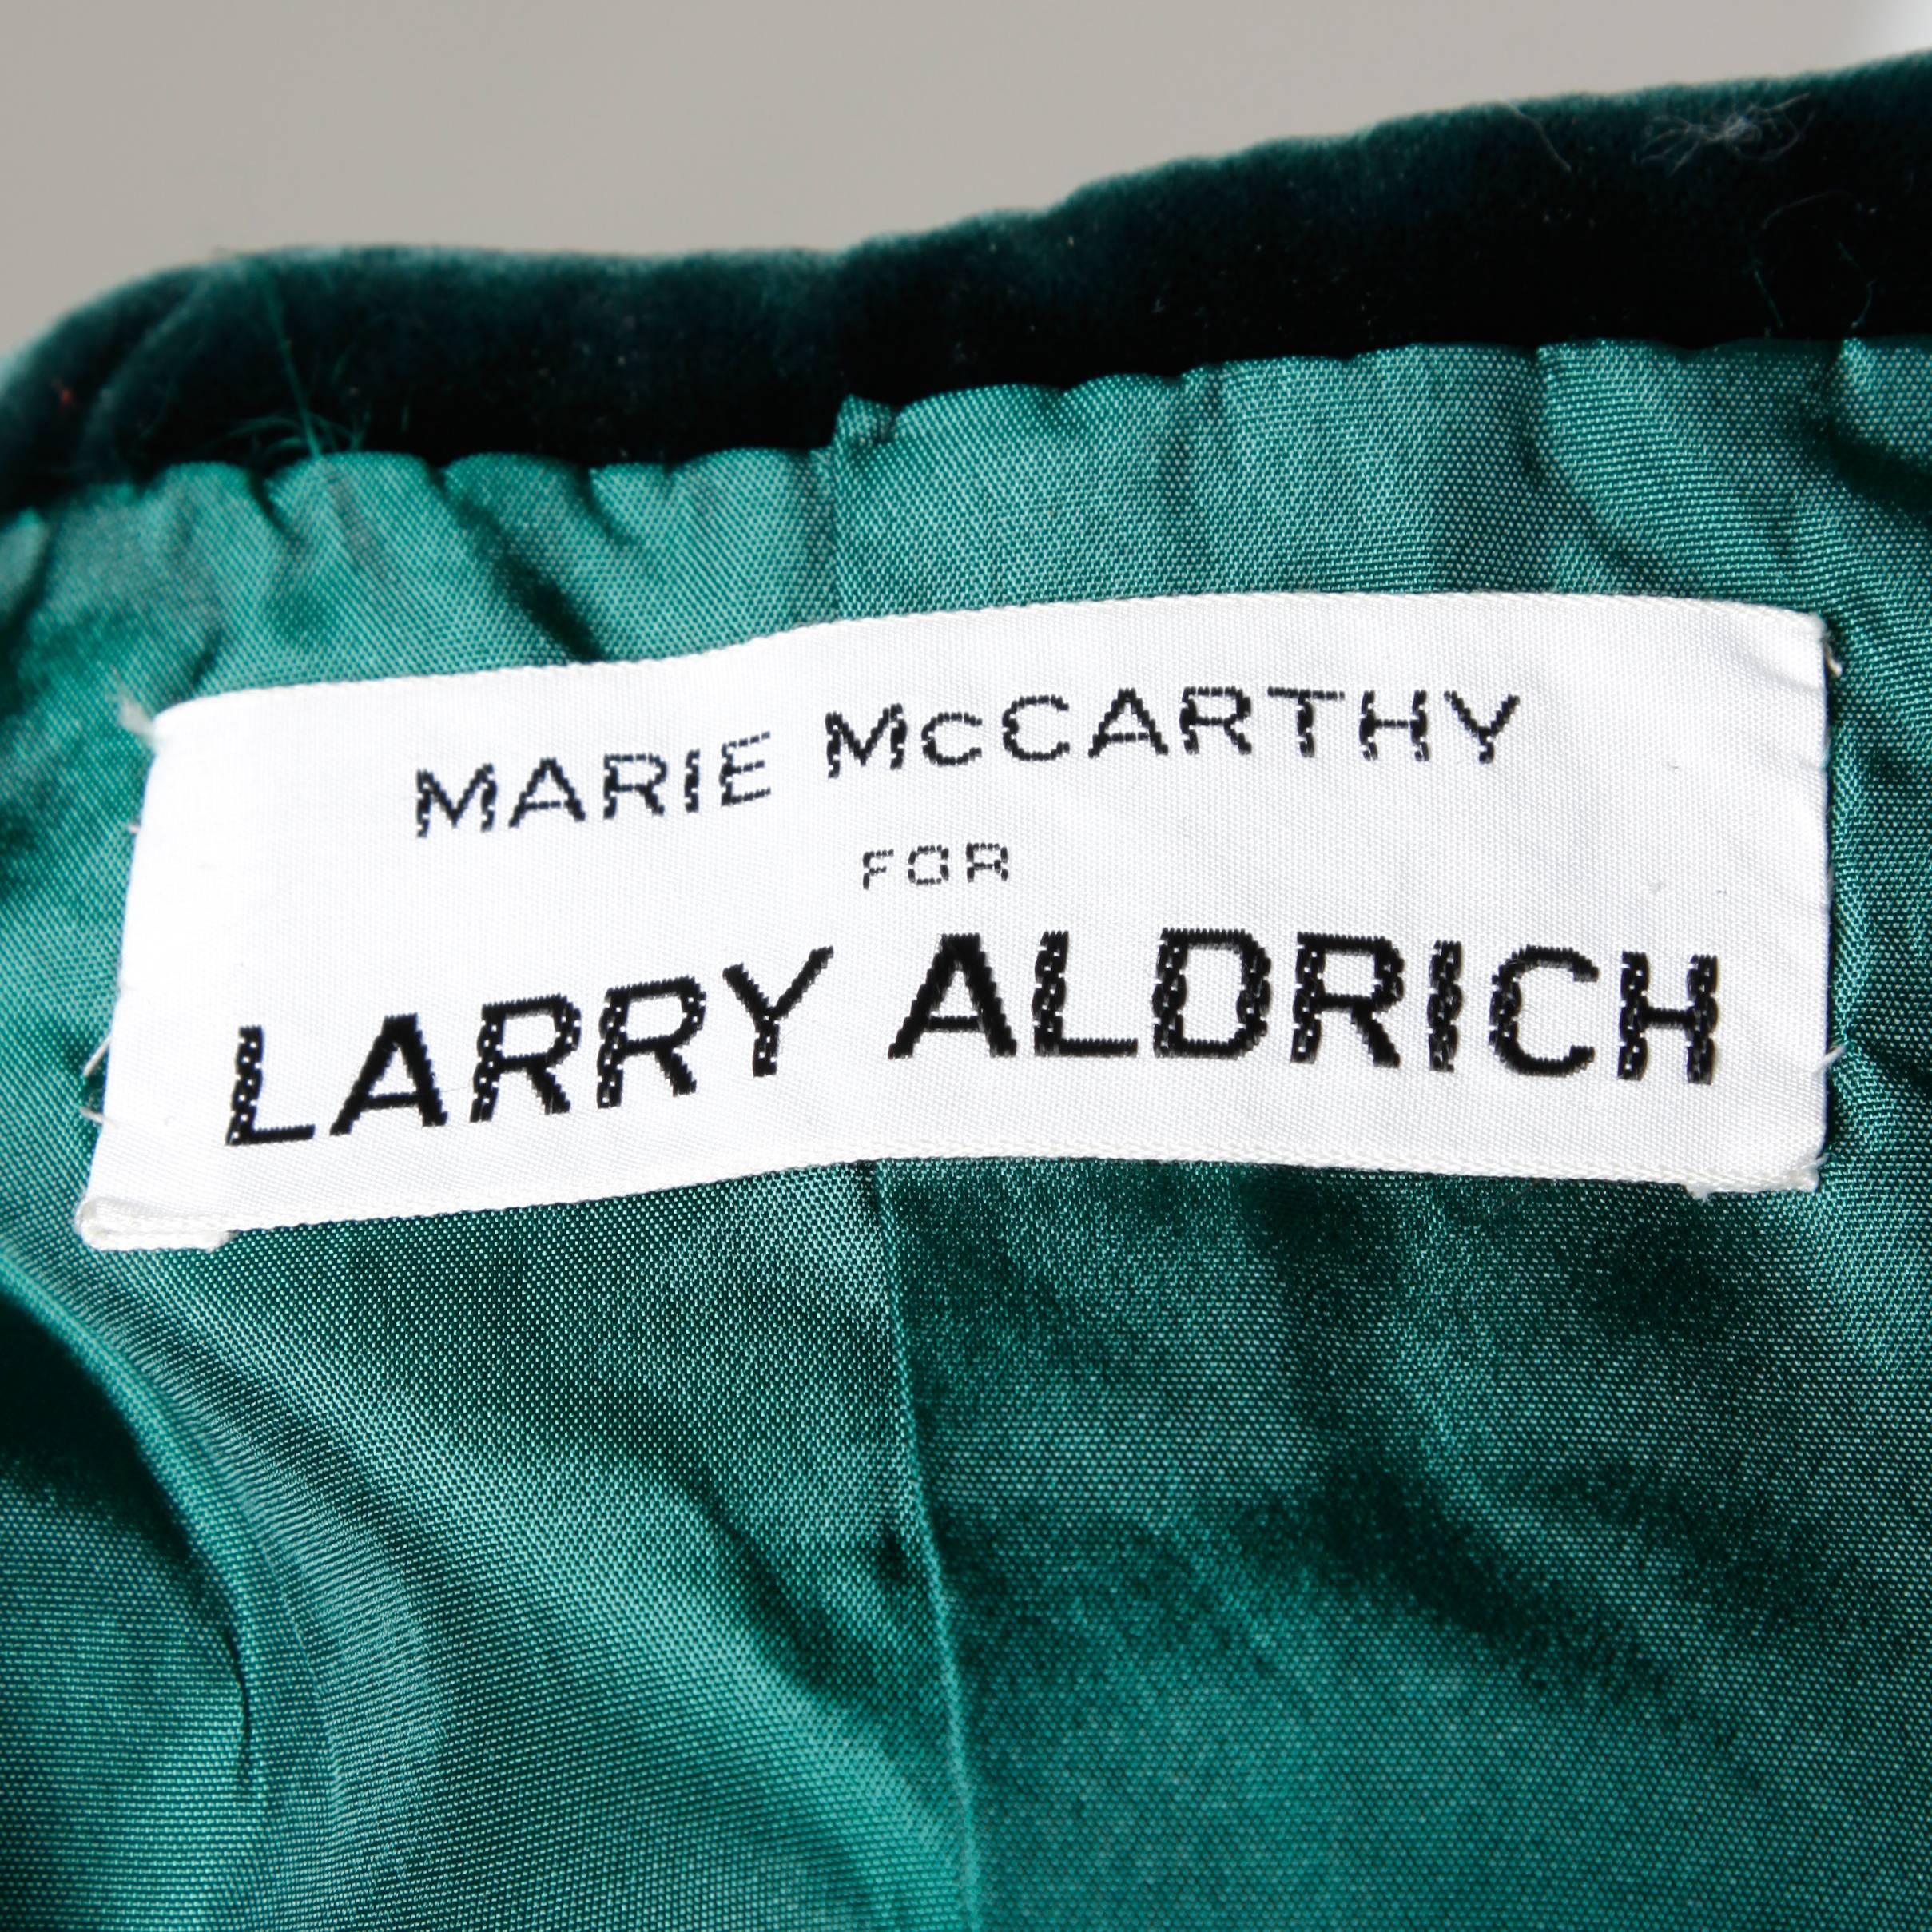 Larry Aldrich by Marie McCarthy Vintage 1960s Embellished Vest or Waistcoat In Excellent Condition For Sale In Sparks, NV